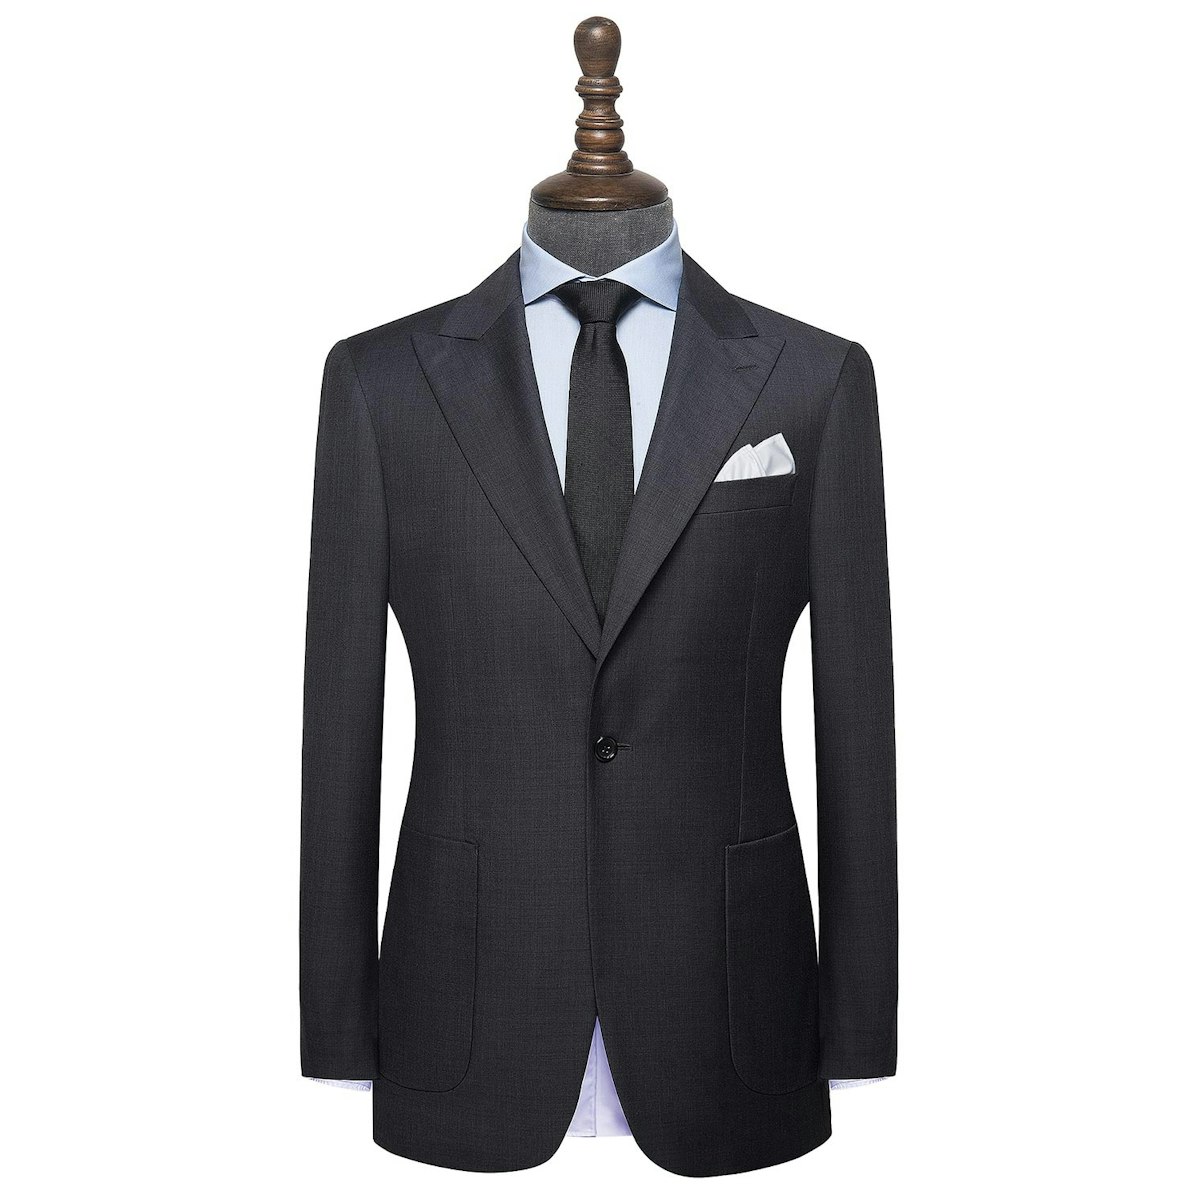 InStitchu Collection The Yately mens suit